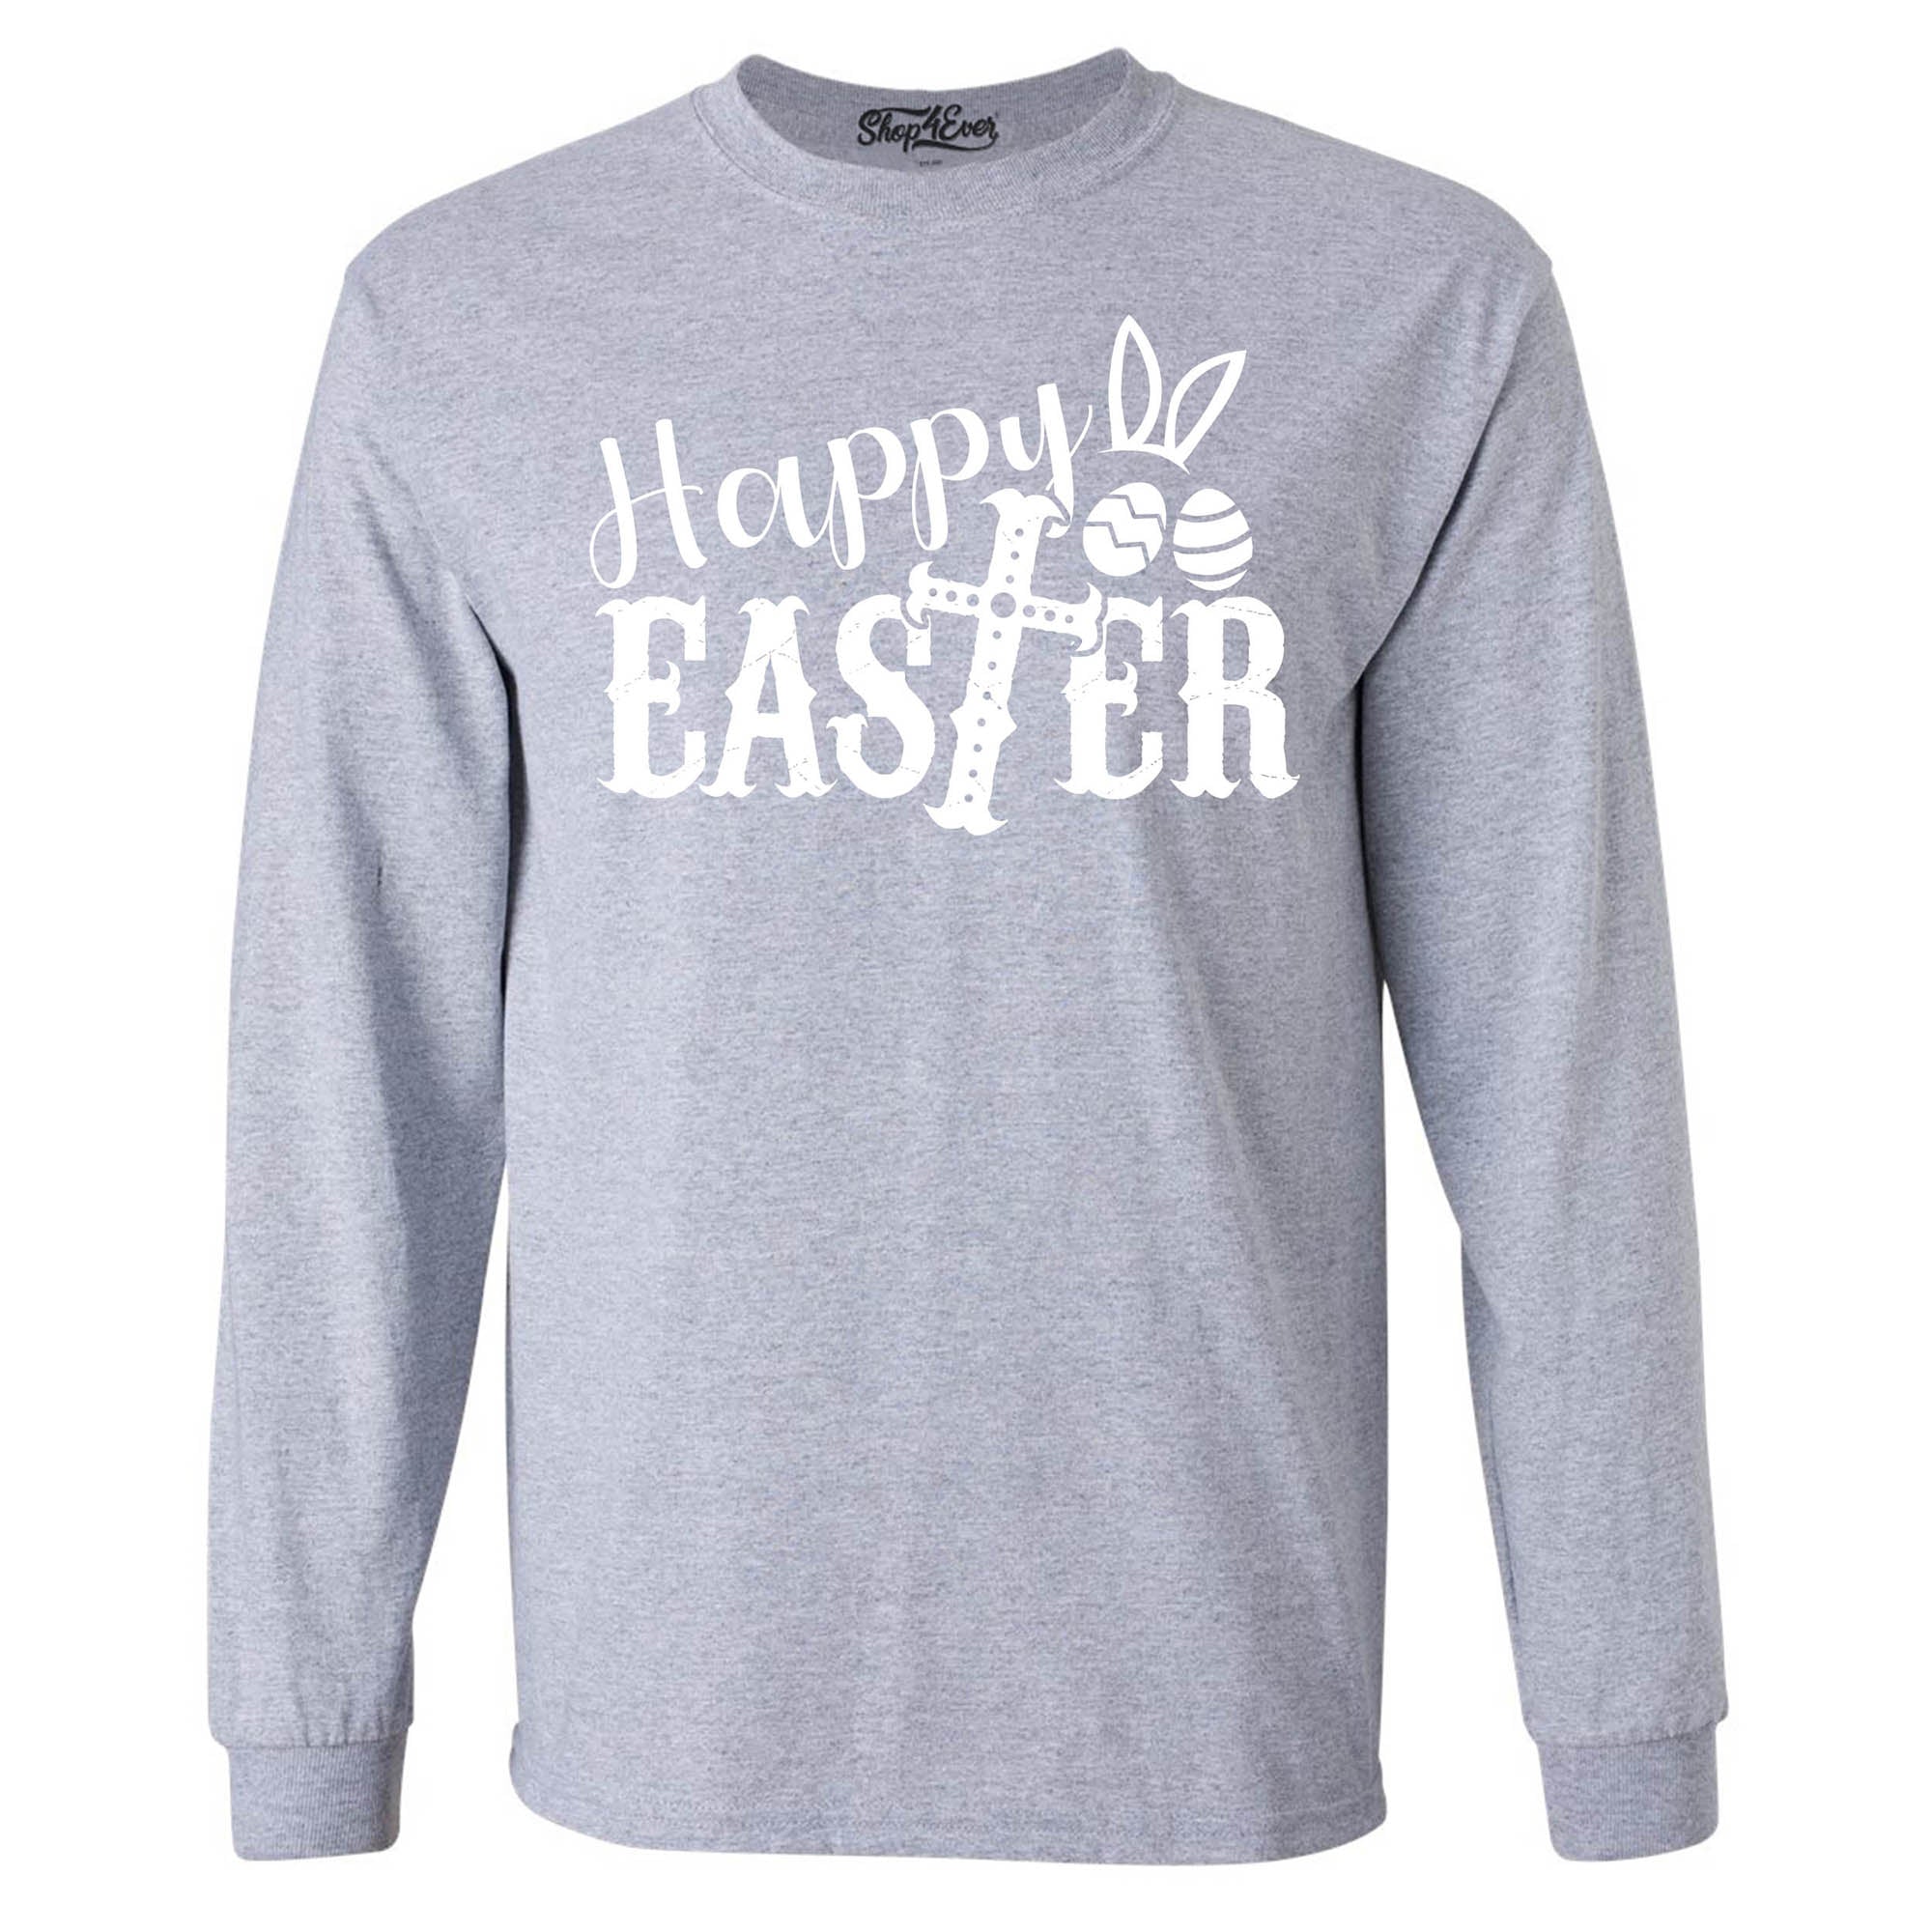 Happy Easter with Cross Long Sleeve Shirt